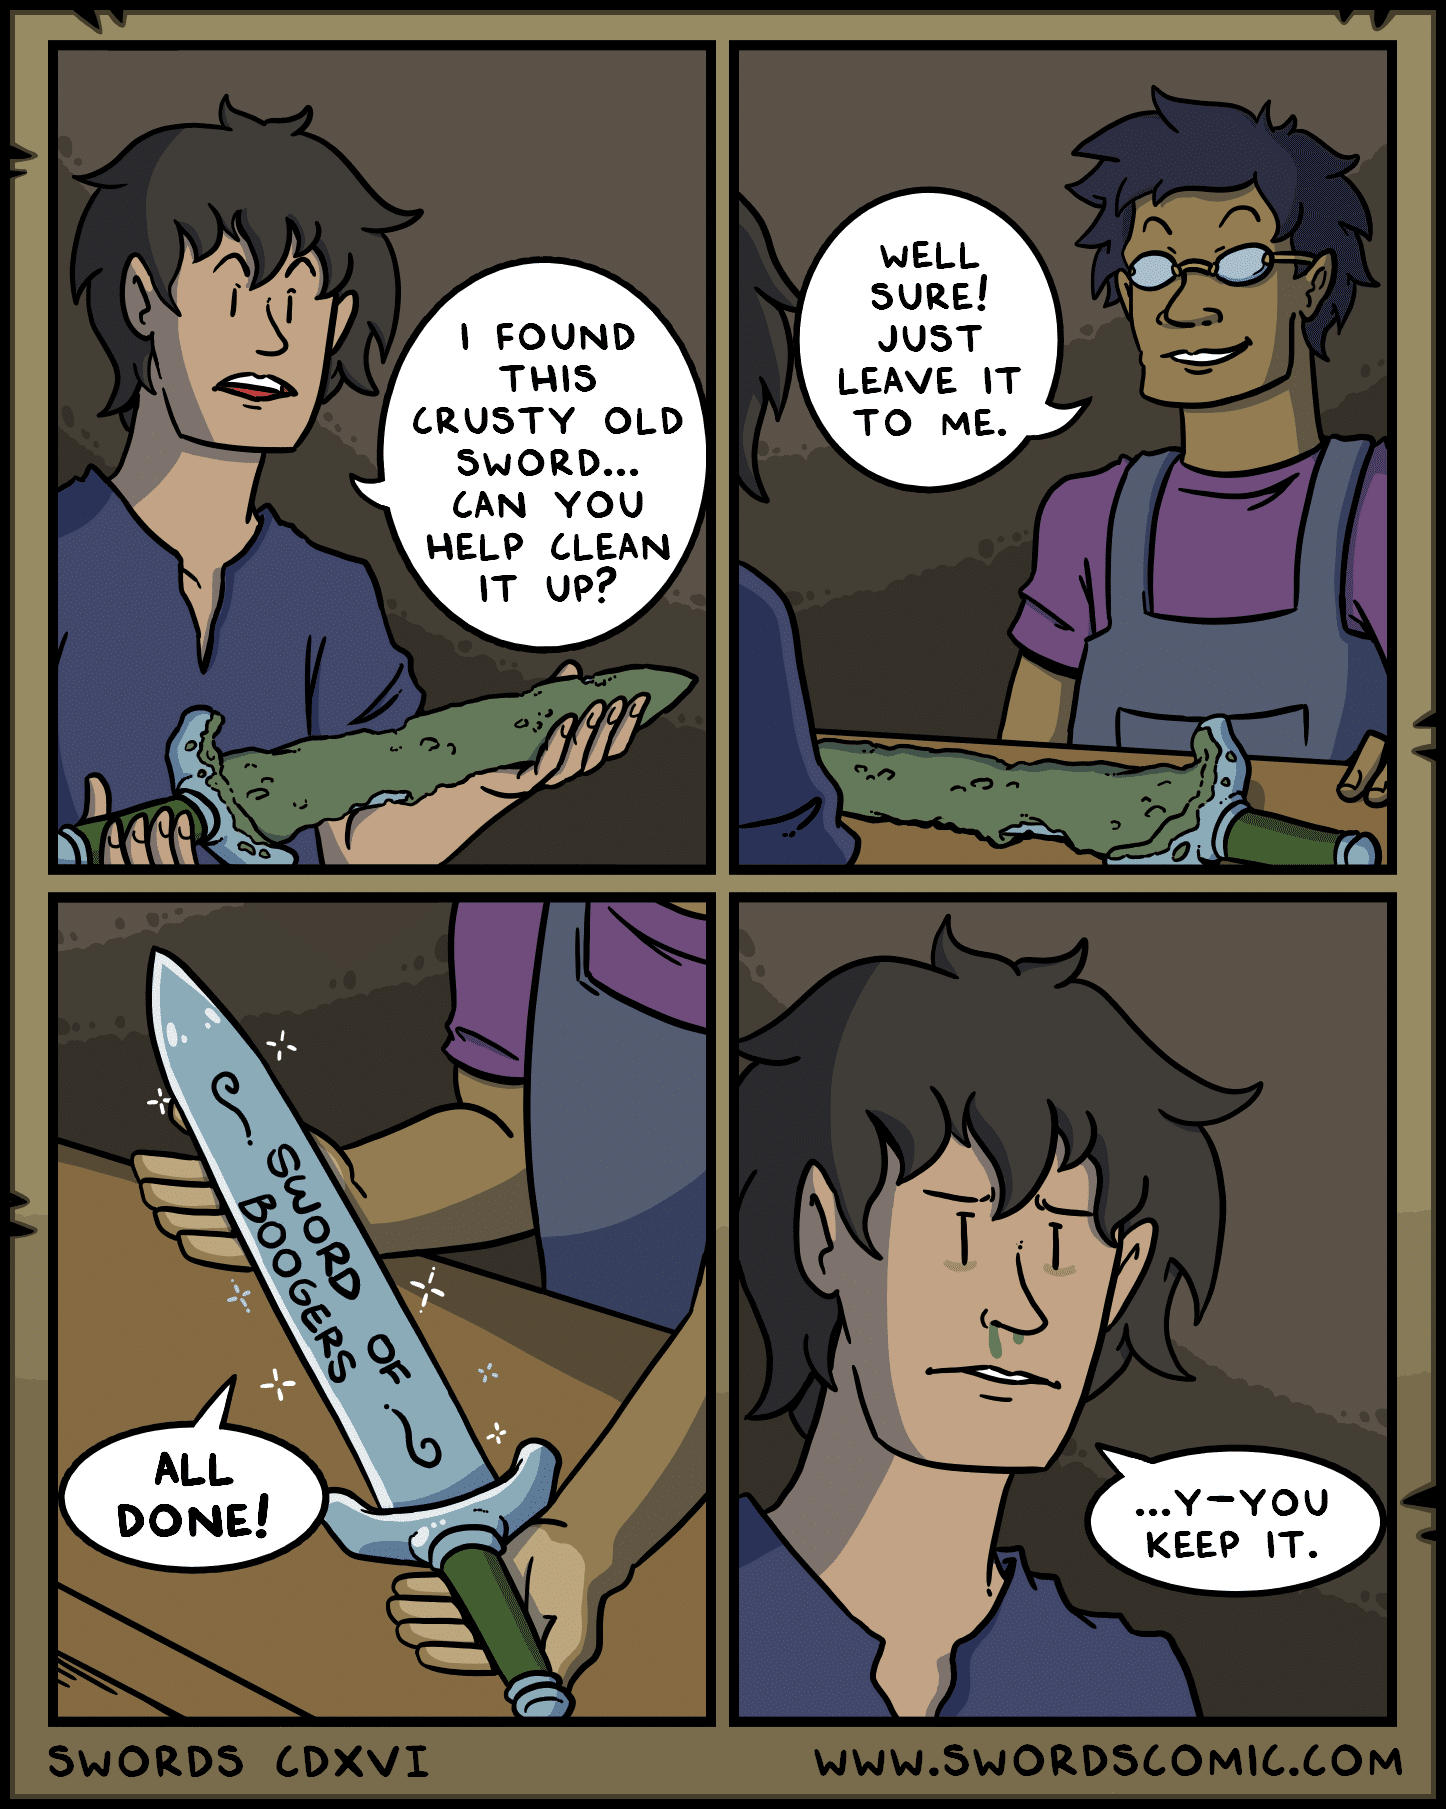 Swords ~ clean, Swords, Clean Comics Swords ~ clean, Swords, Clean text: DONE! SWORDS I FOUND THIS CRUSTY OLD SWORD... CAN YOU HELP CLEAN IT up? CDXVI WELL SURE! JUST LEAVE IT TO ME. ...Y—YOU KEEP IT. WWW.SWORDSCOMIC.COM 